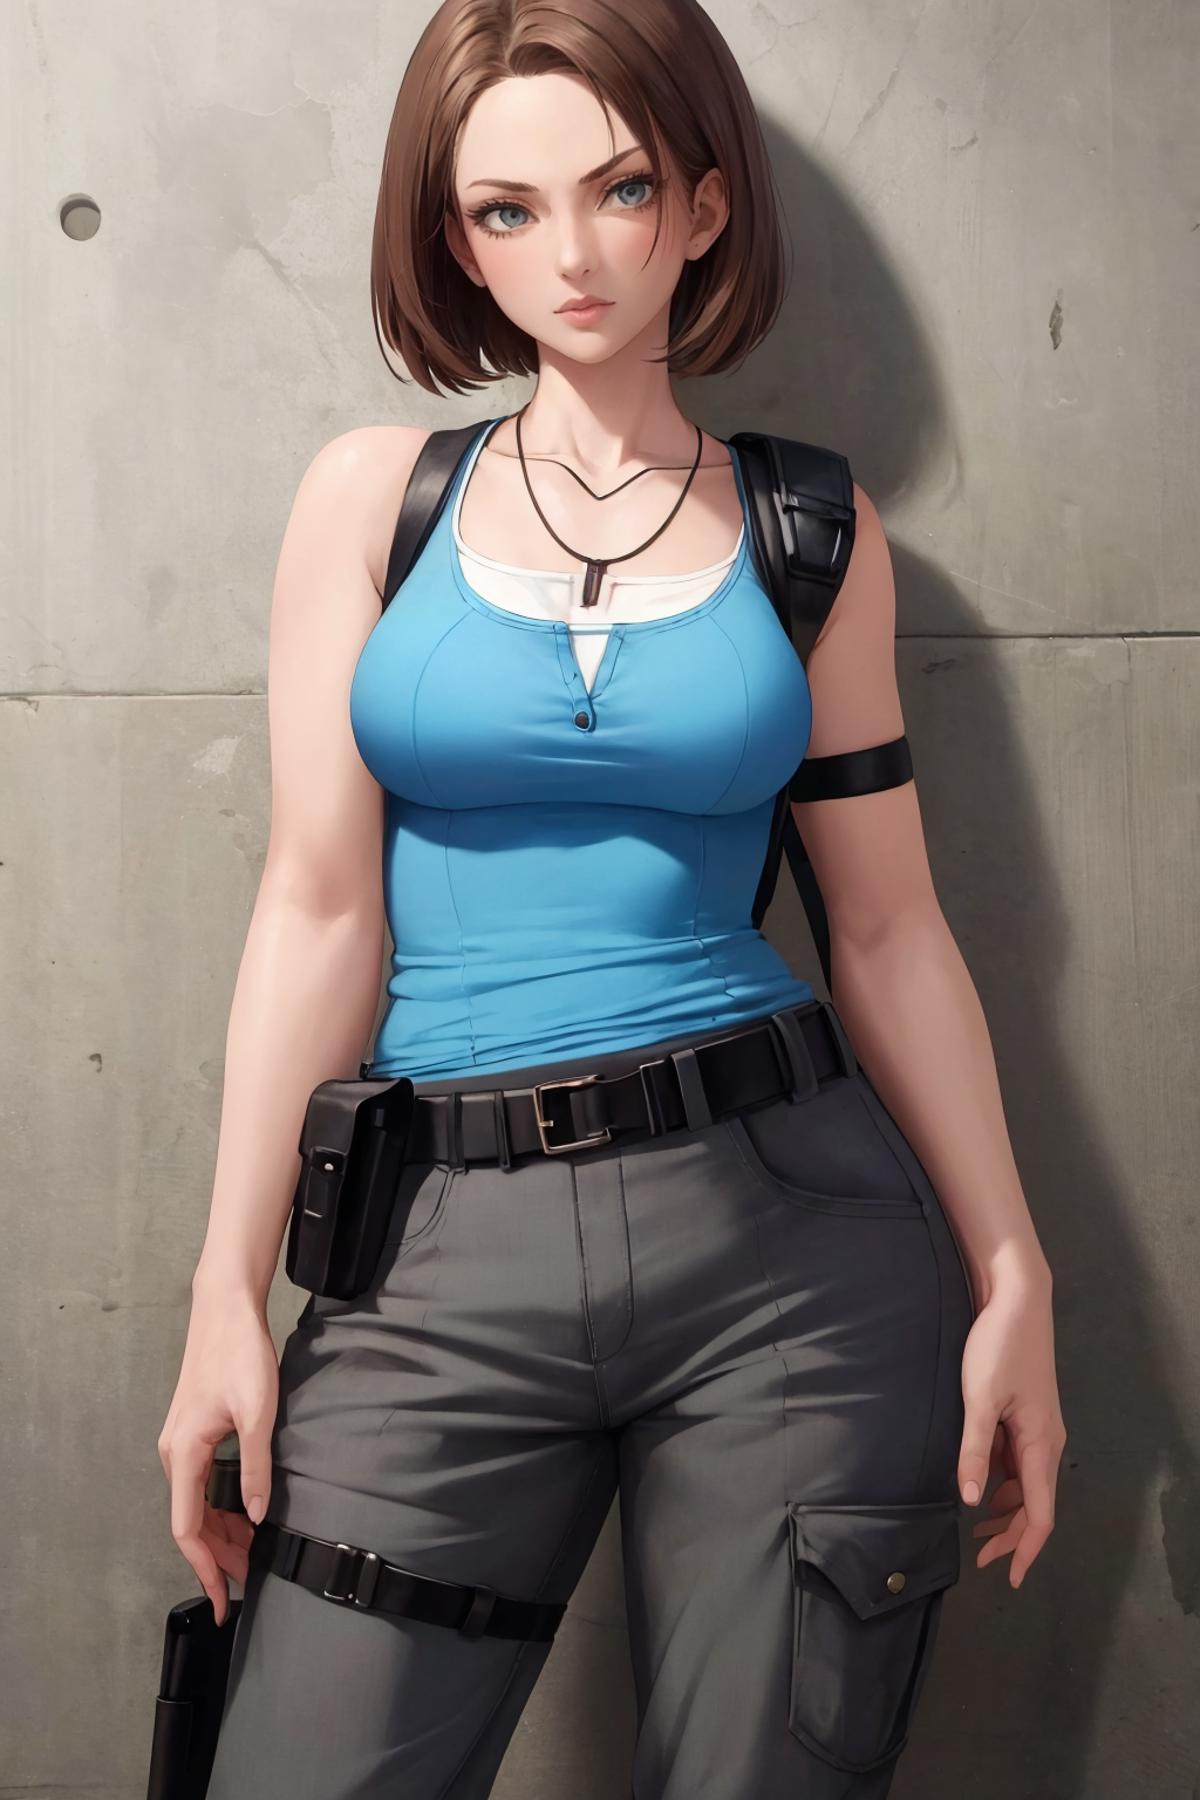 Jill Valentine (Resident Evil) LoRA | 4 Outfits (RE1, RE3 Original, RE3 Remake, and RE5) image by richyrich515